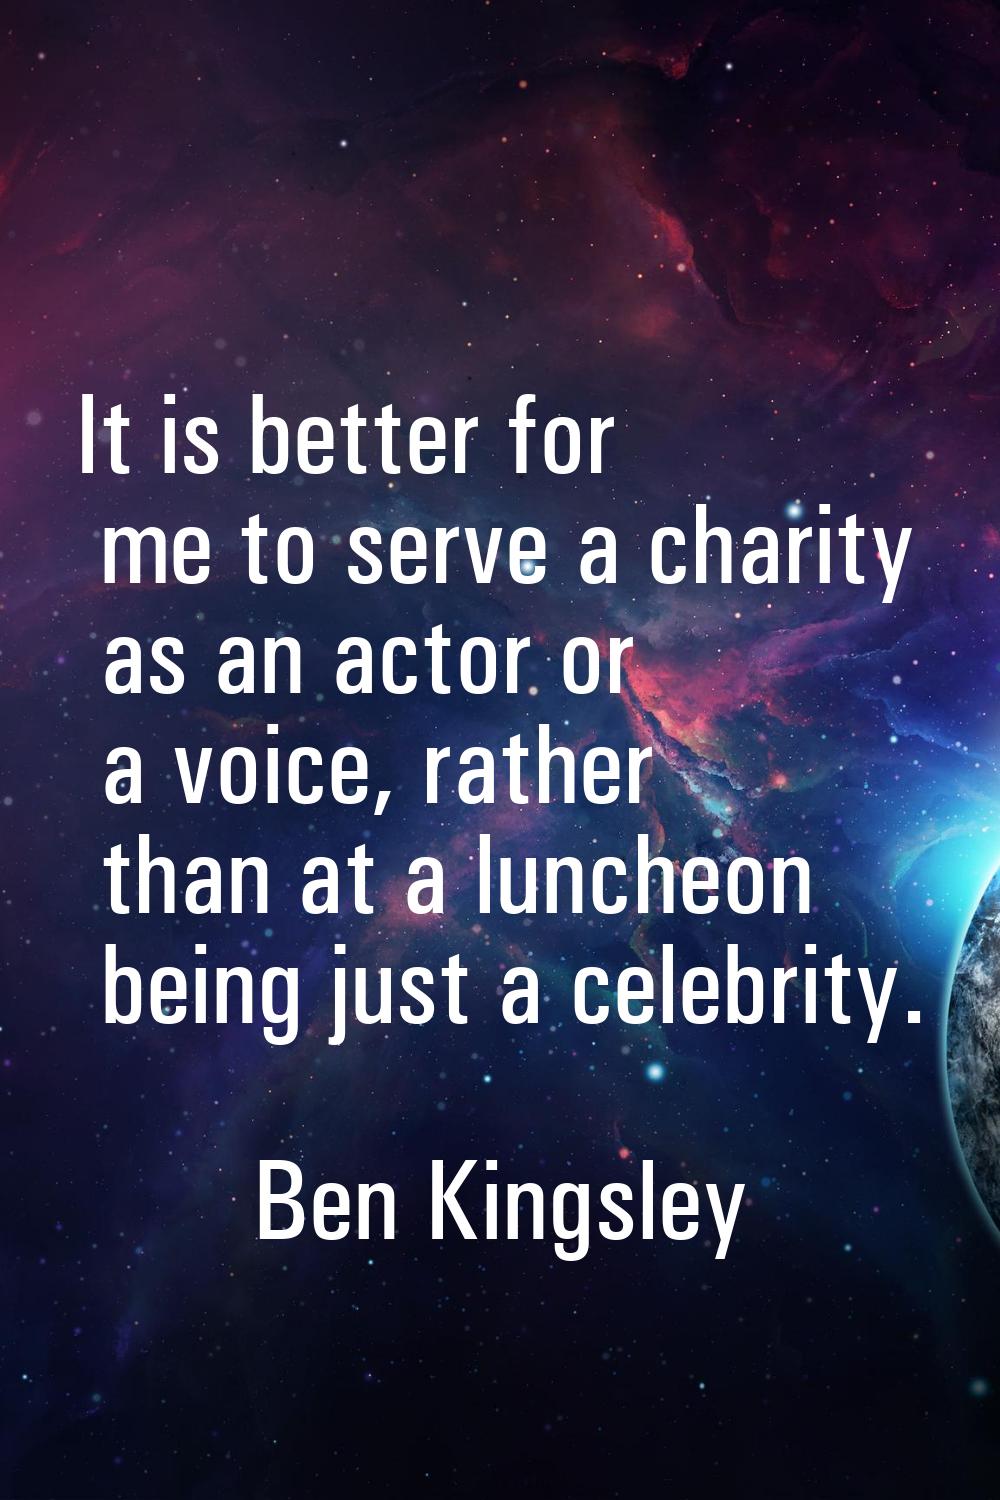 It is better for me to serve a charity as an actor or a voice, rather than at a luncheon being just